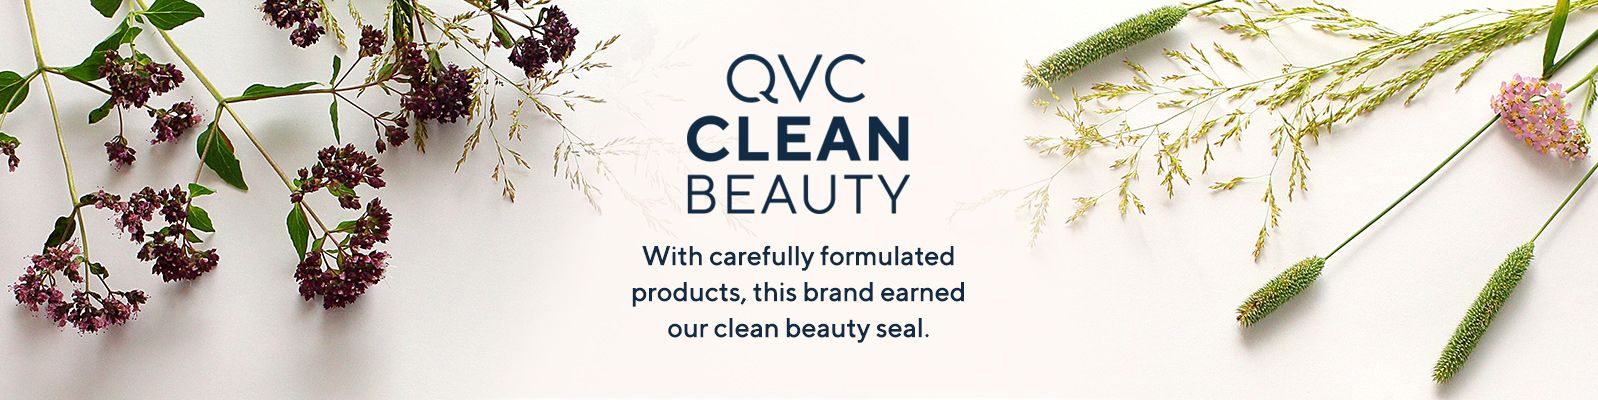 QVC® Clean Beauty - With carefully formulated products, this brand earned our clean beauty seal.